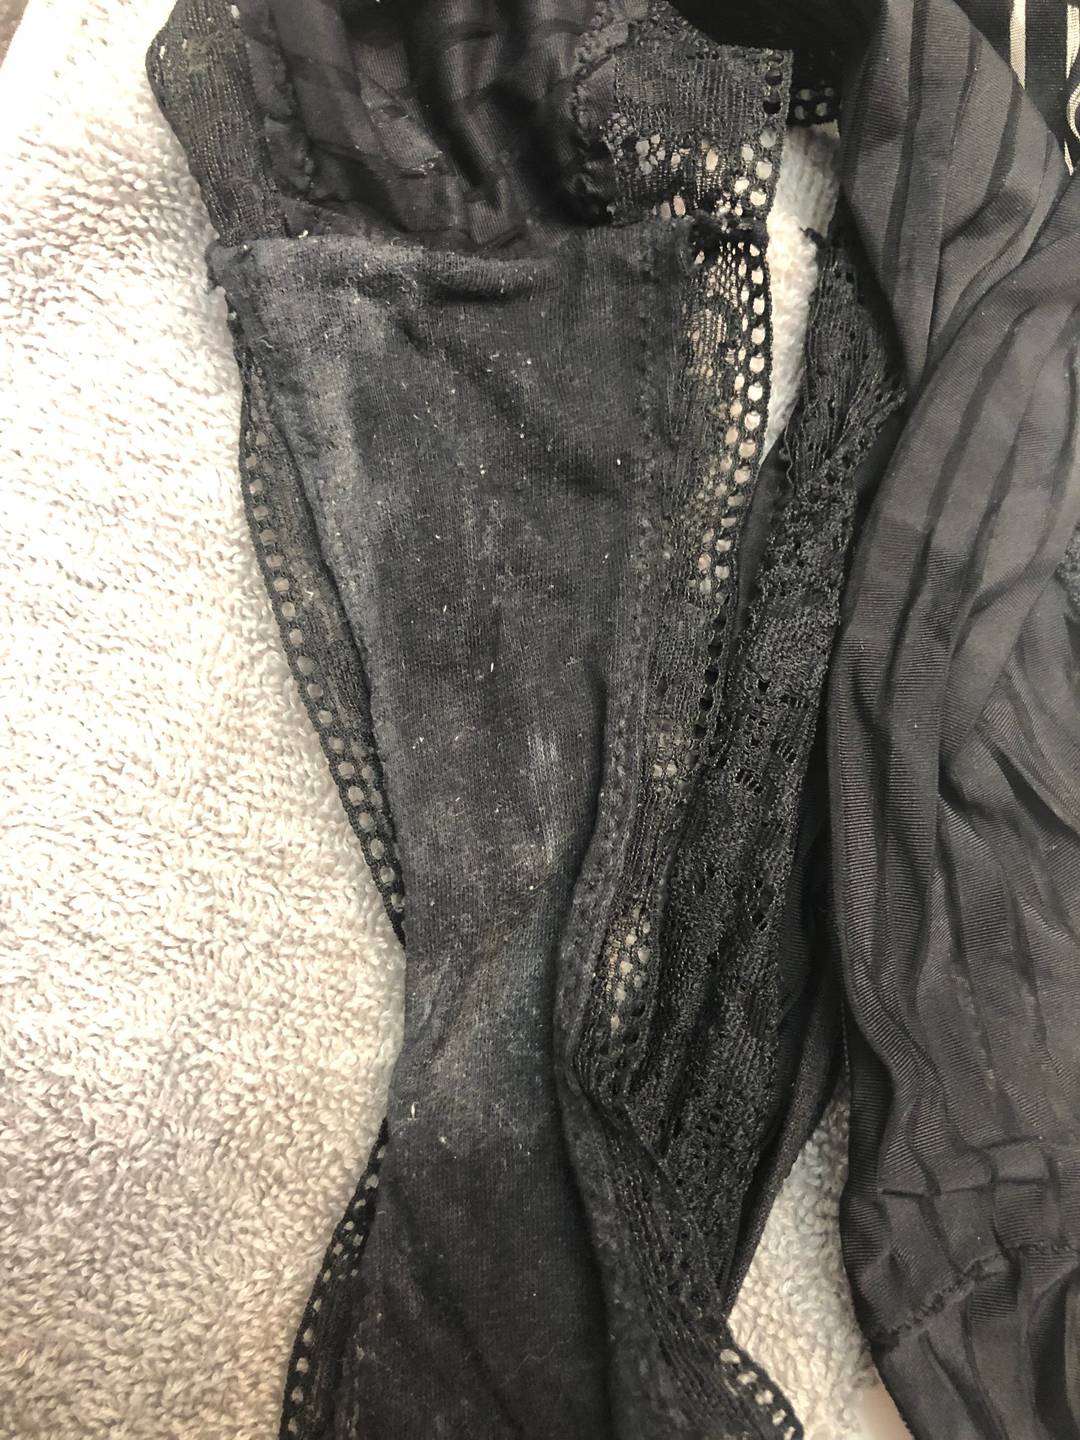 Found my wifes cum stained panties